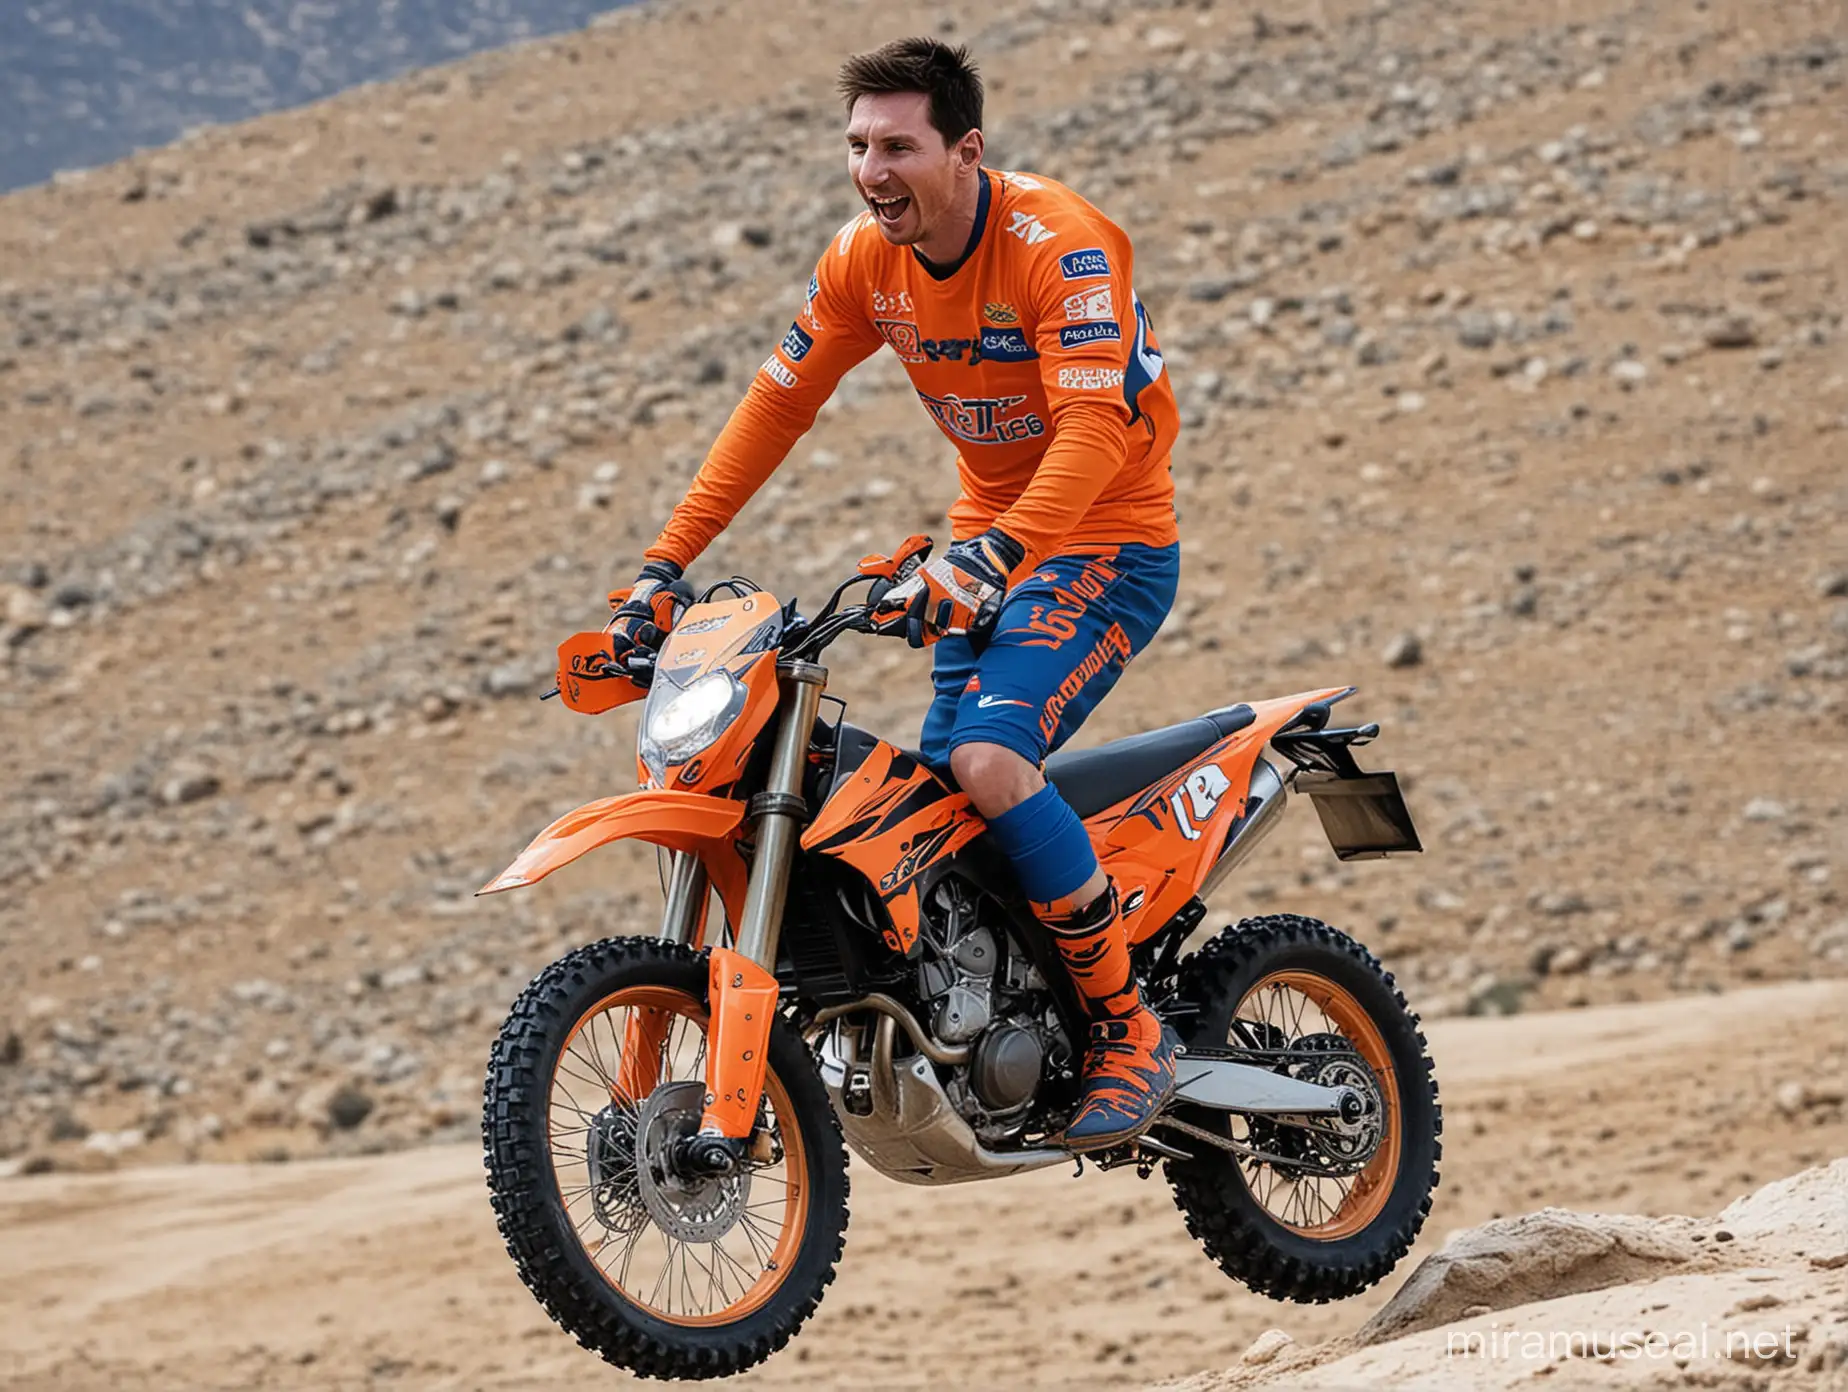 Messi High Jumping on a KTM Motorcycle